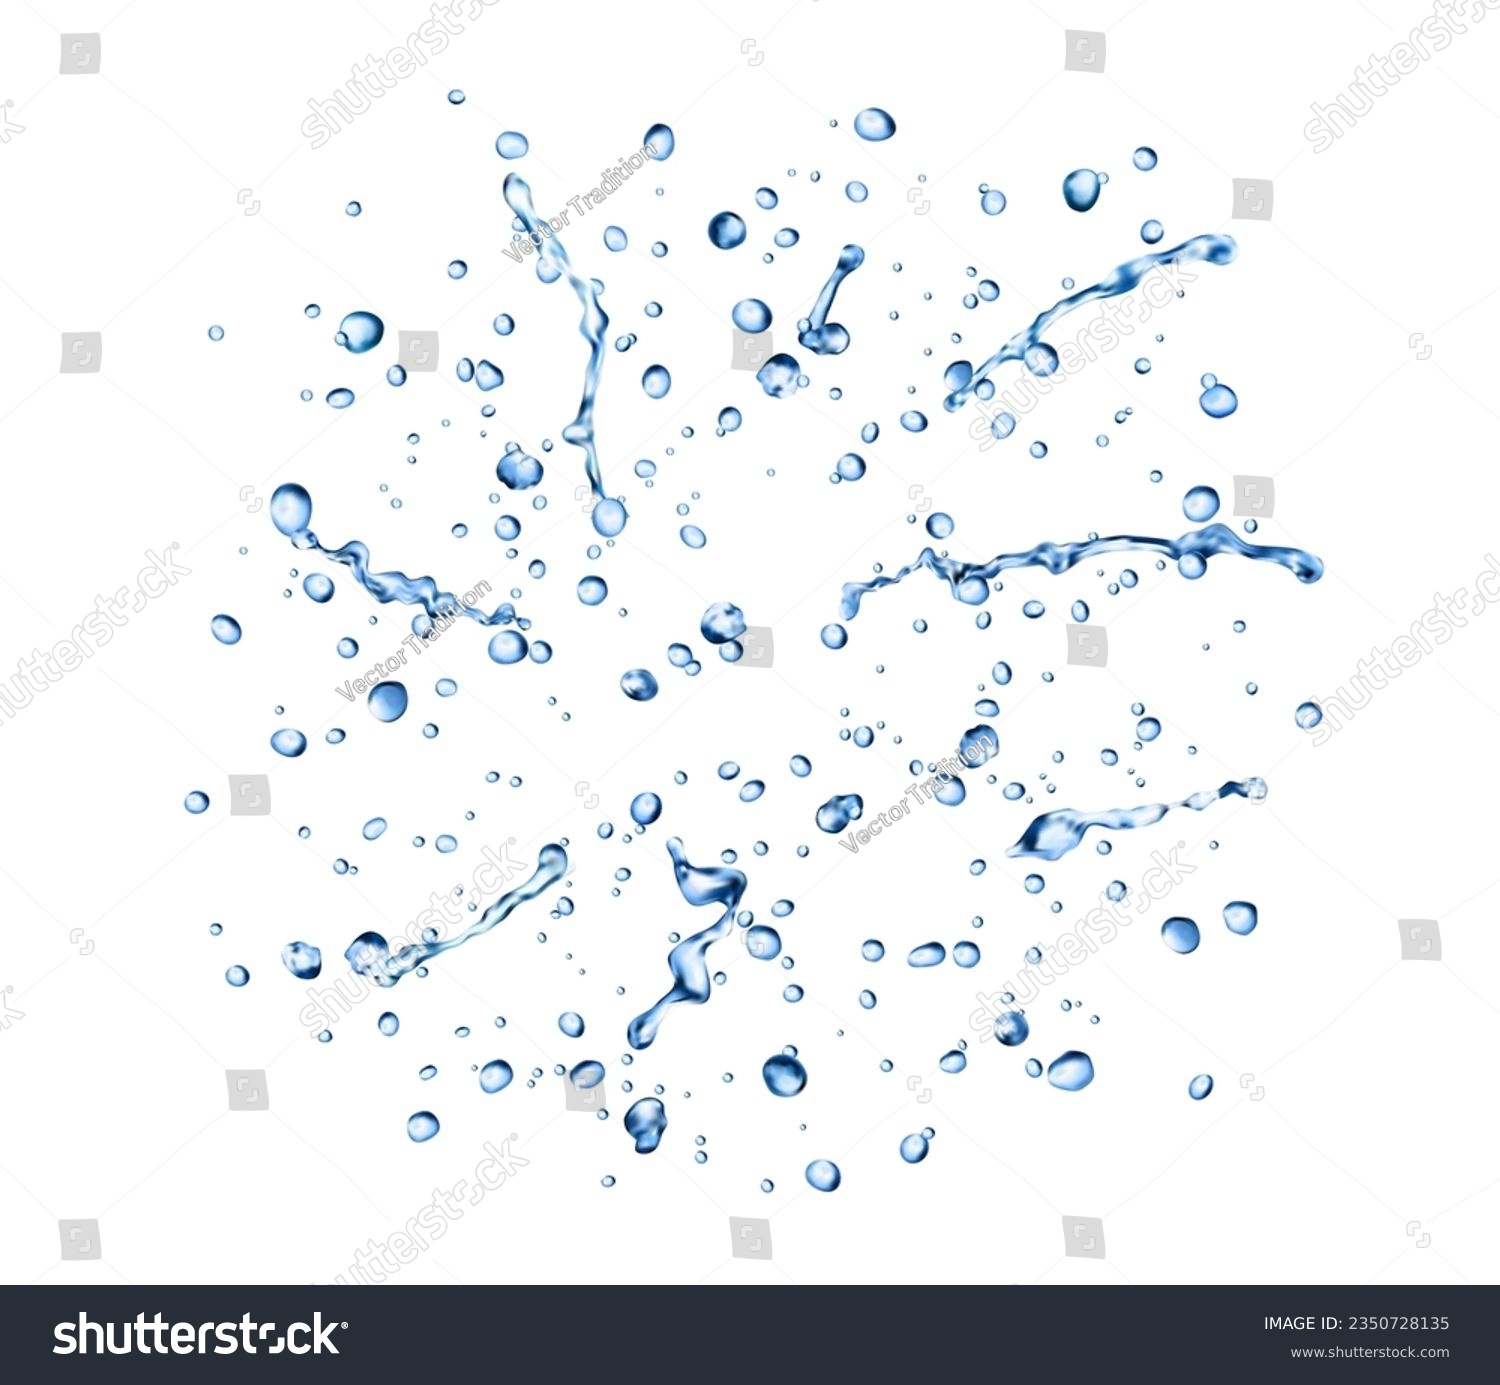 Realistic rain blue water drops and splatters. Realistic 3d vector small translucent droplets formed when water condenses or falls. They shimmer, cling, create ripples, refreshing and reflecting light #2350728135